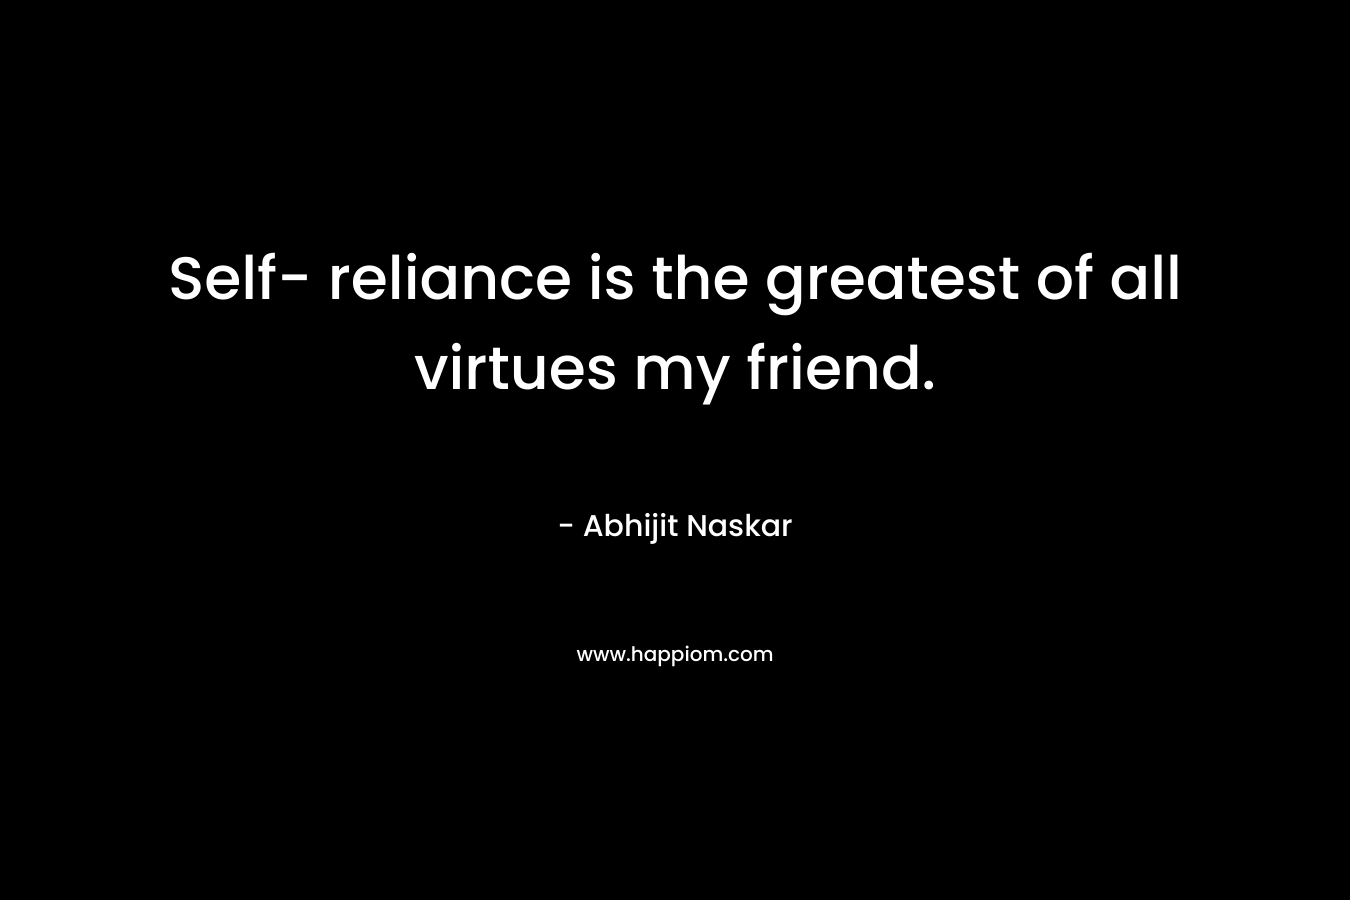 Self- reliance is the greatest of all virtues my friend.